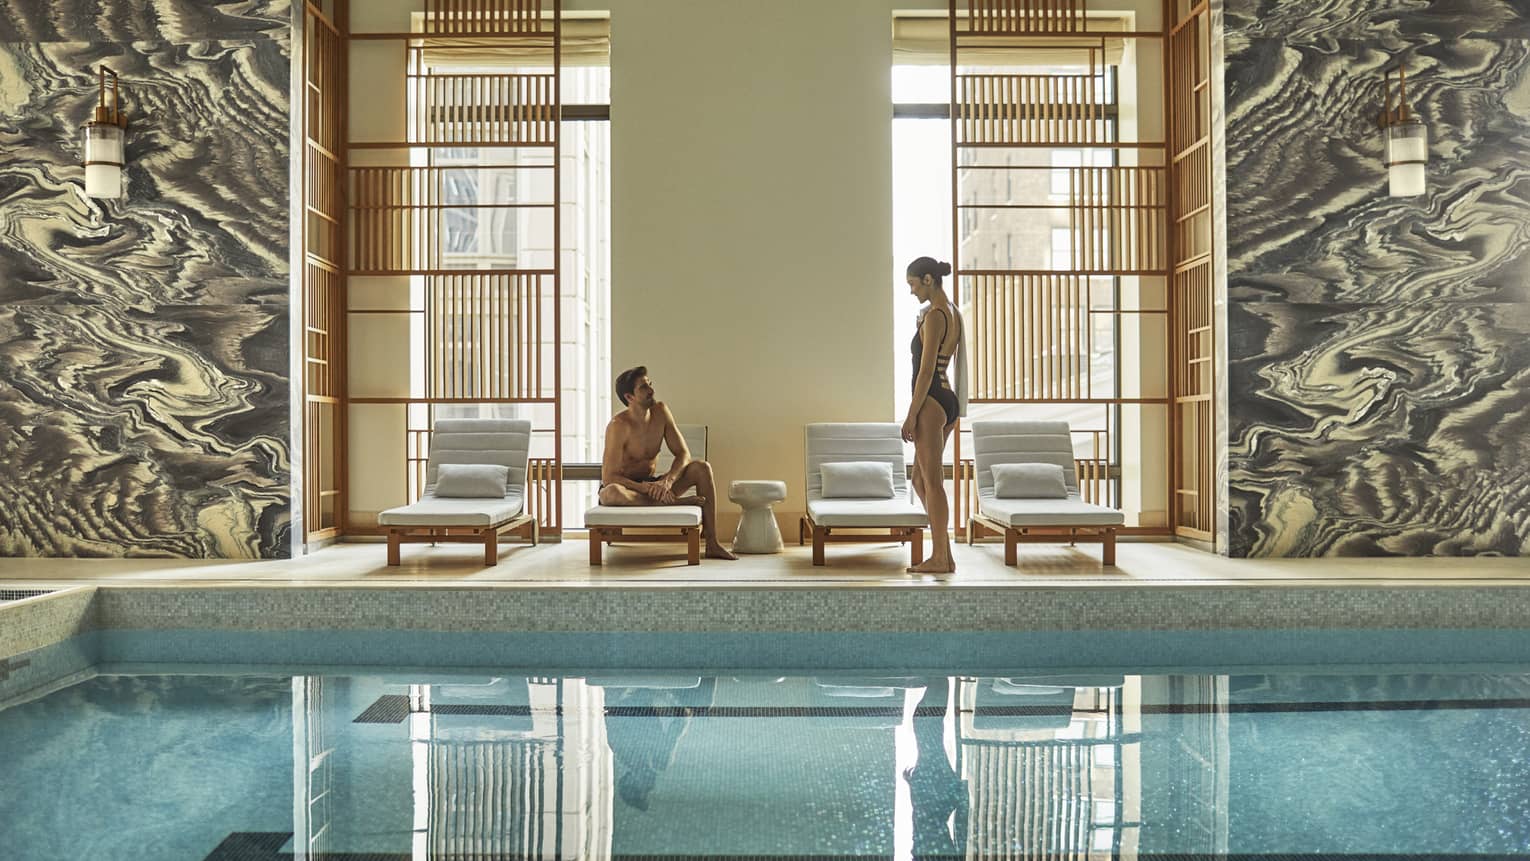 Man and woman in swimsuits by lounge chairs, window on indoor swimming pool deck